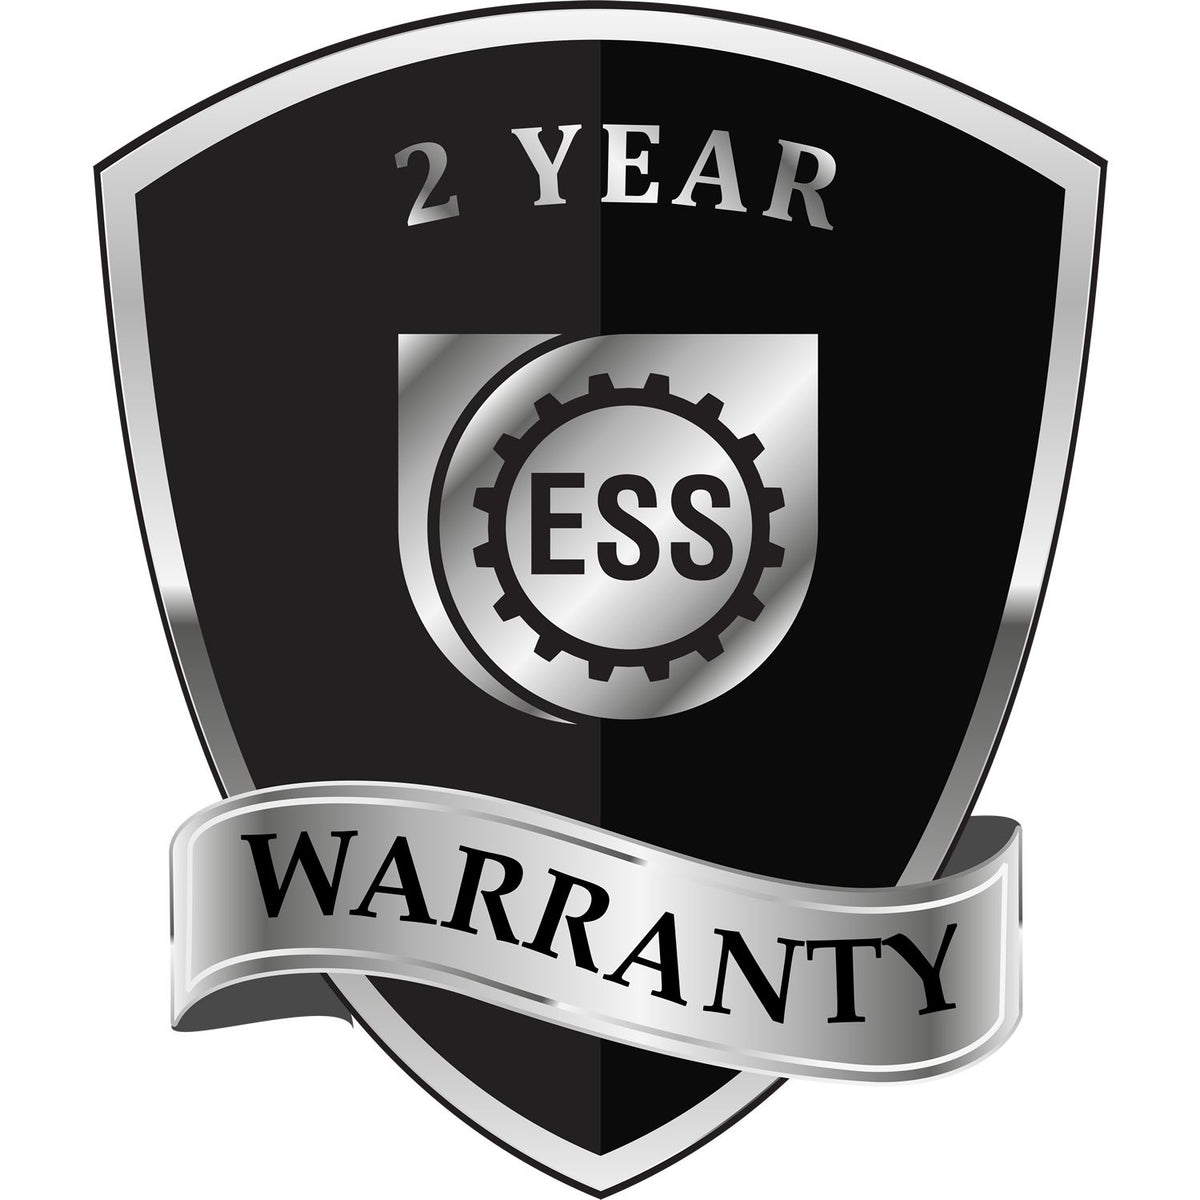 A badge or emblem showing a warranty icon for the Oklahoma Desk Architect Embossing Seal